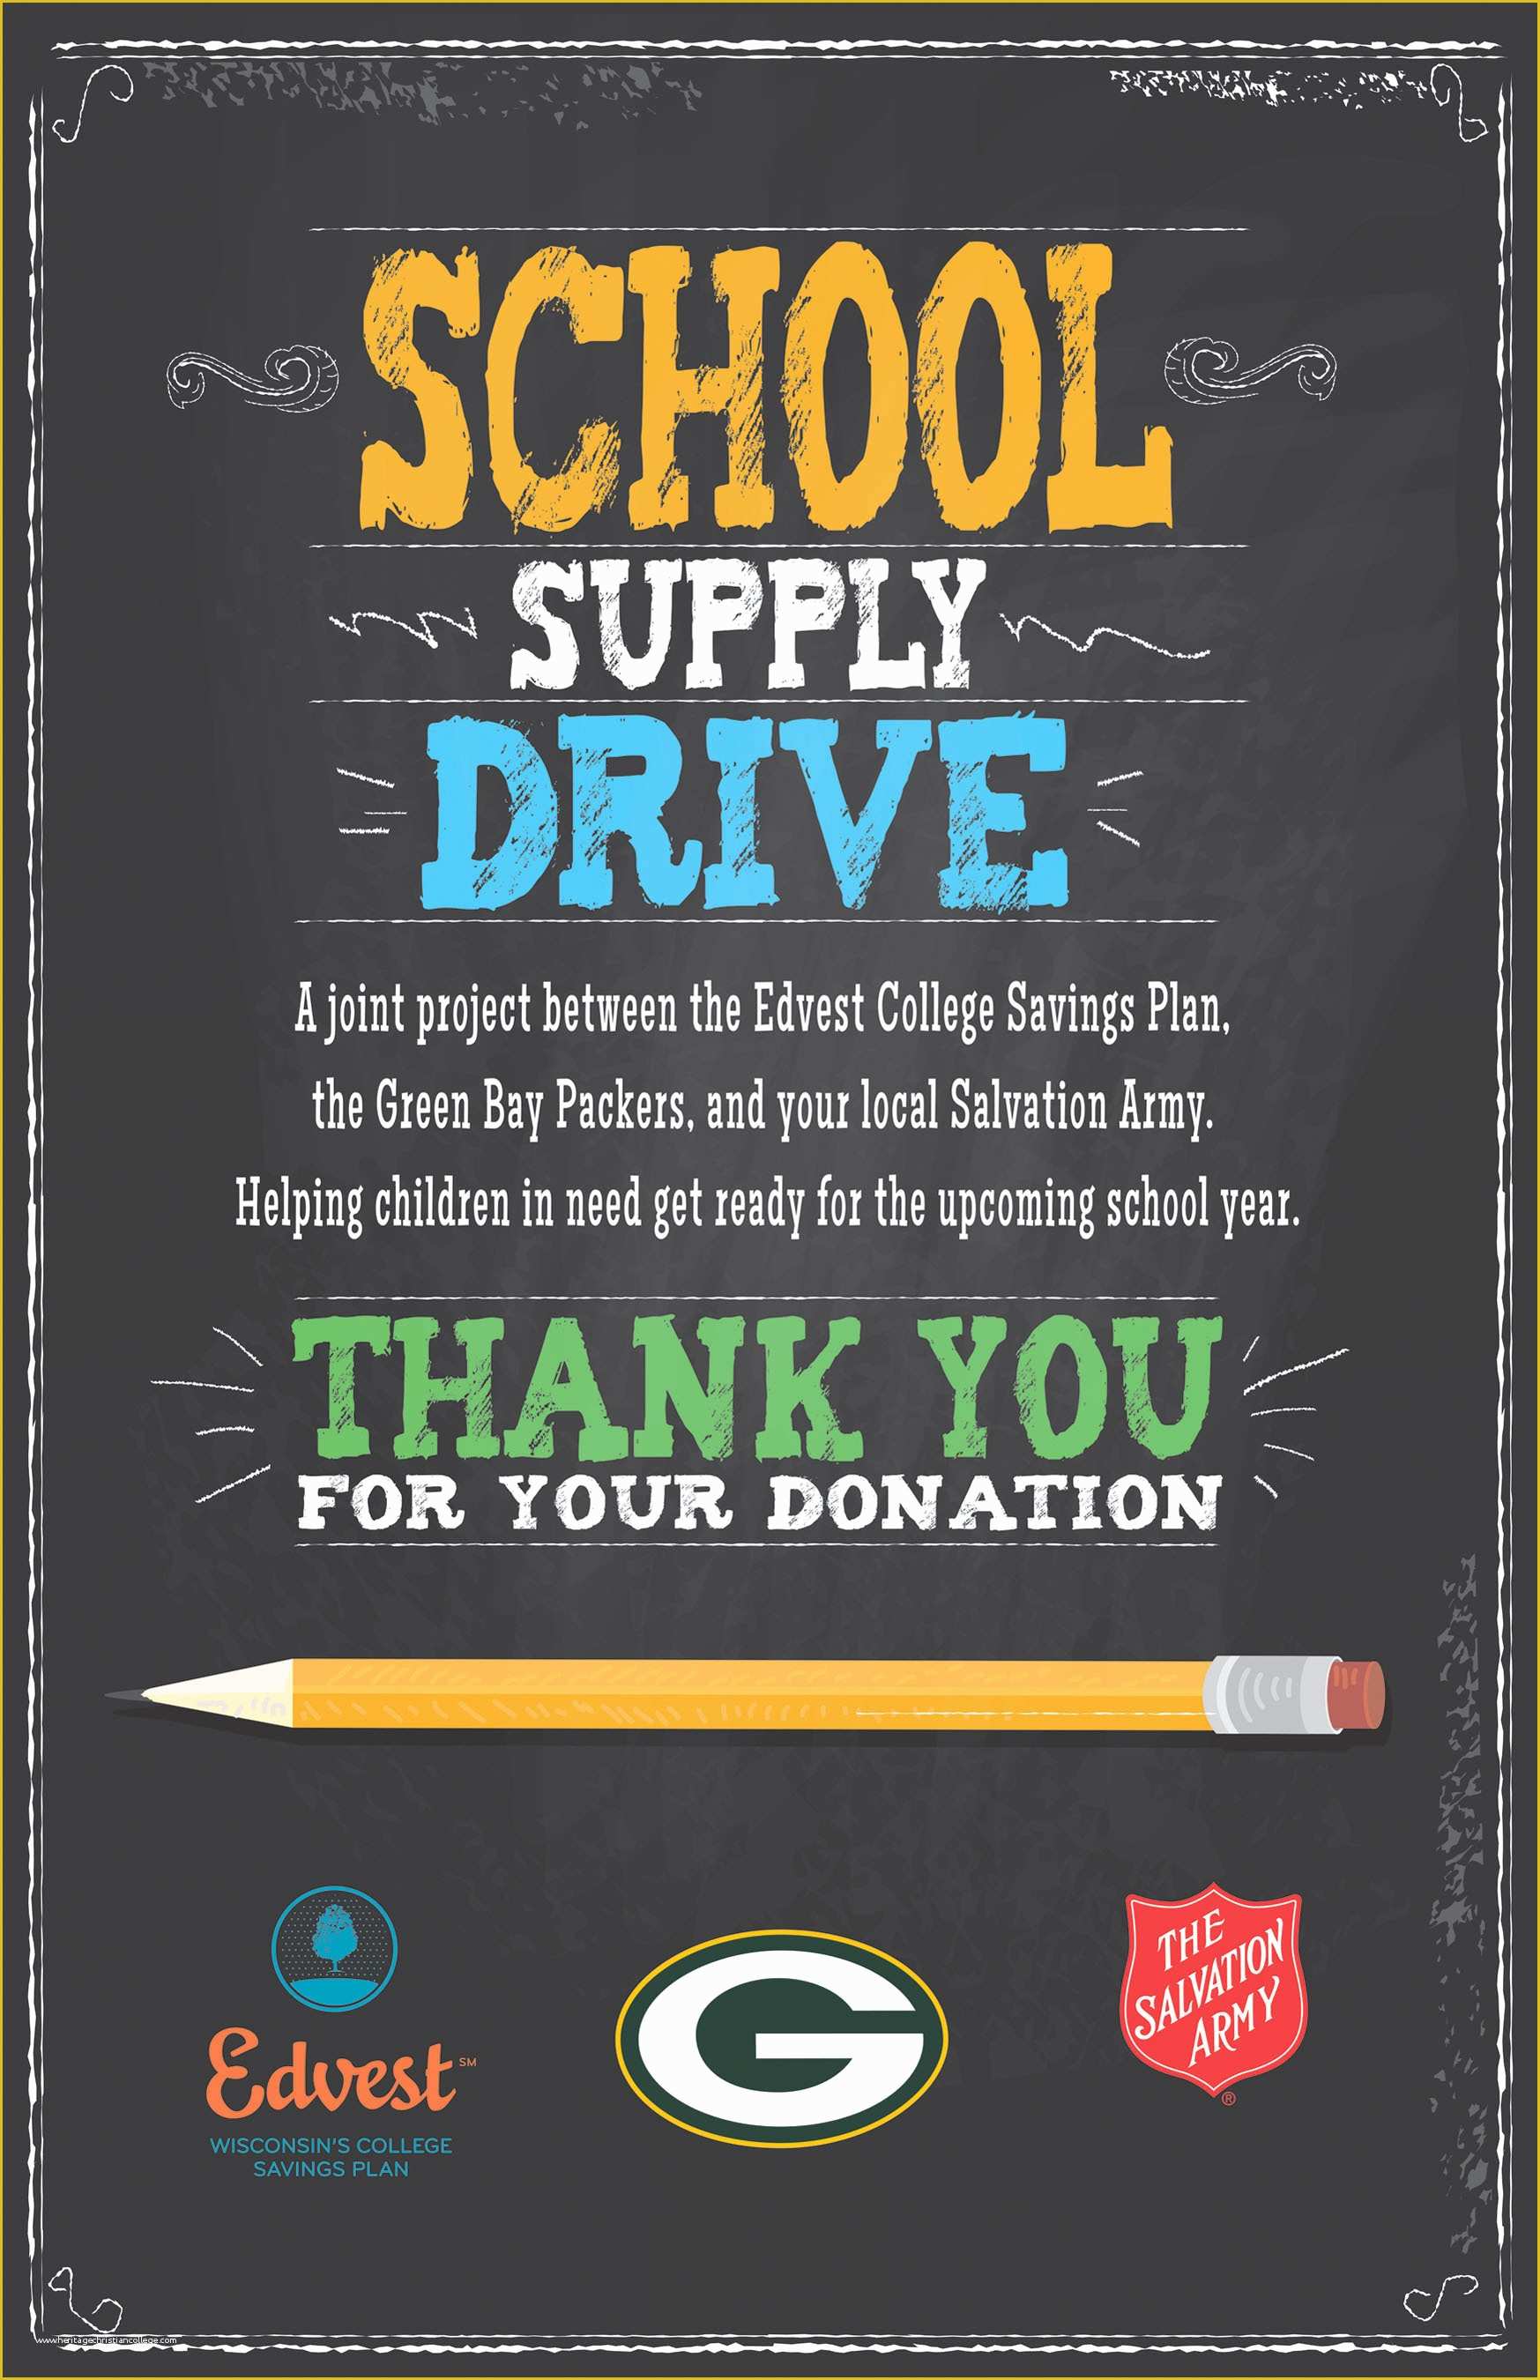 Free School Supply Drive Flyer Template Of Packers Edvest Salvation Army to Hold School Supply